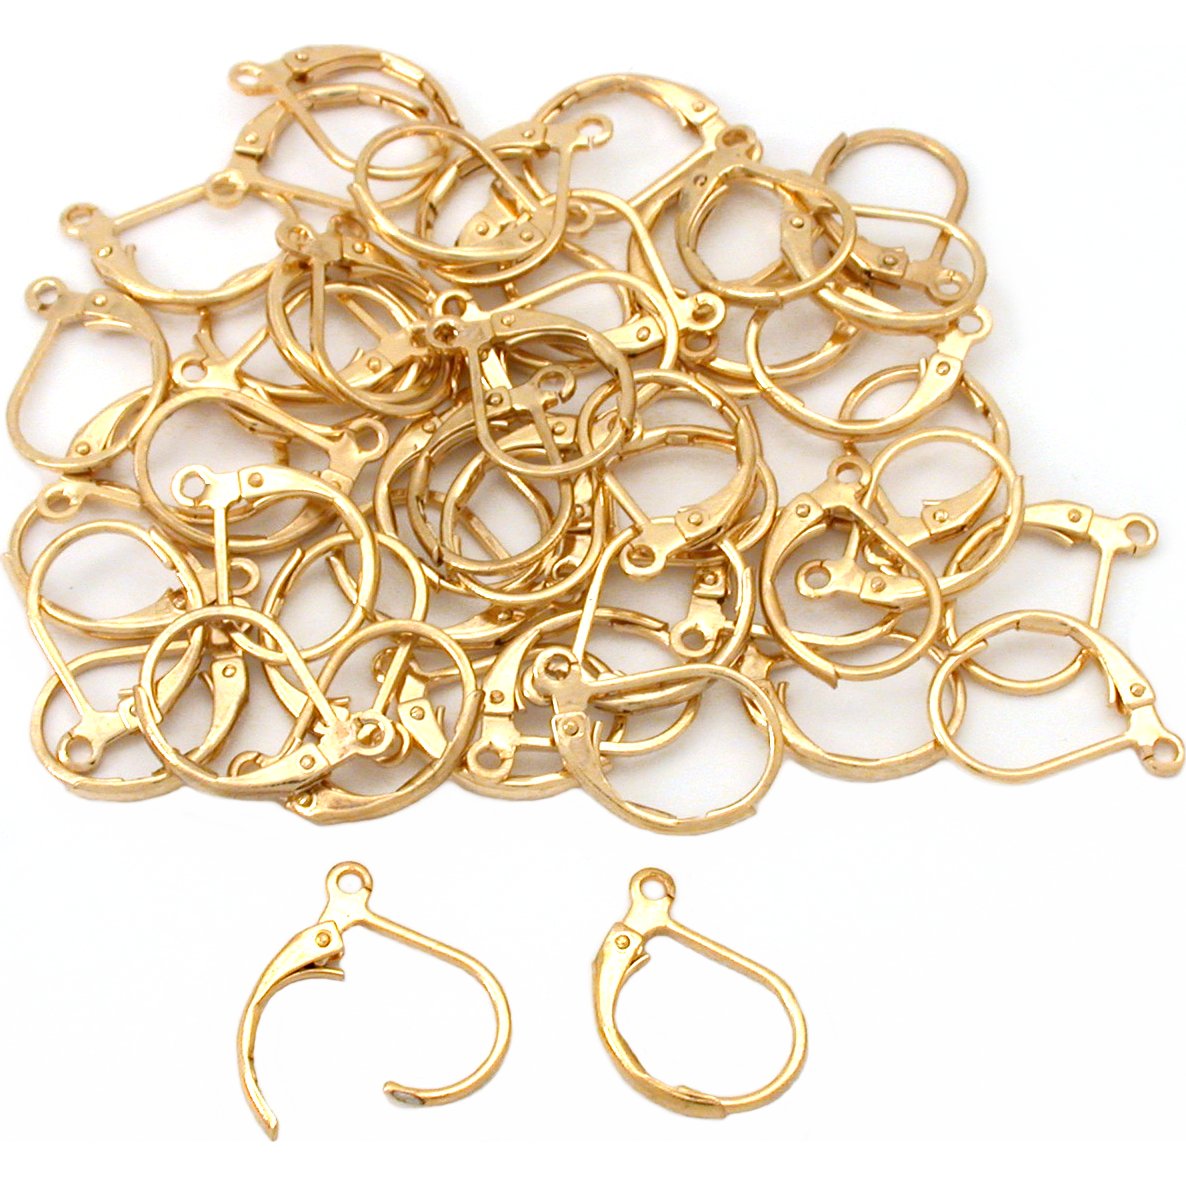 Hypoallergenic Earring Making Kit, Modacraft 2000Pcs Earring Making  Supplies Kit with Earring Hooks, Earring Findings, Earring Posts, Earring  Backs, Earring Pins Jump Rings for Jewelry Making Supplies